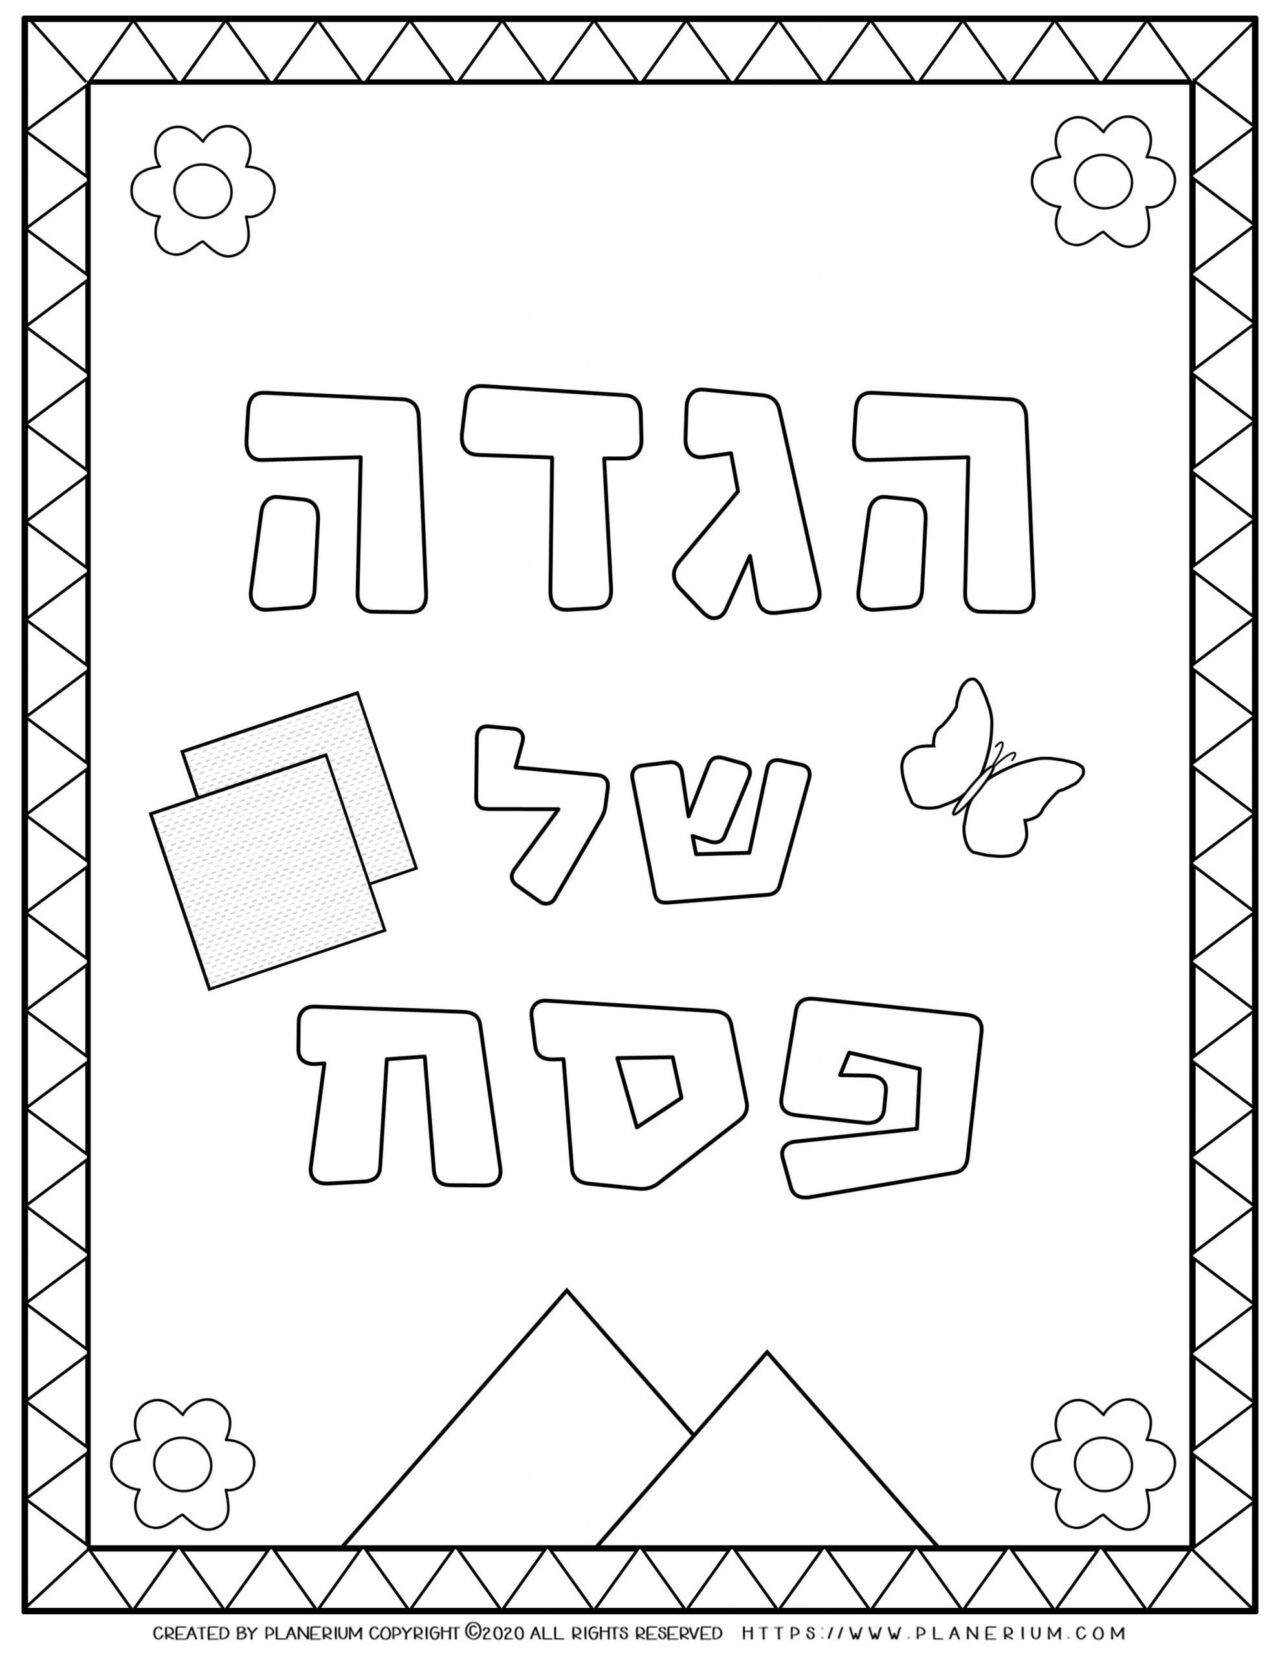 Passover coloring page - Haggadah book cover - Hebrew title